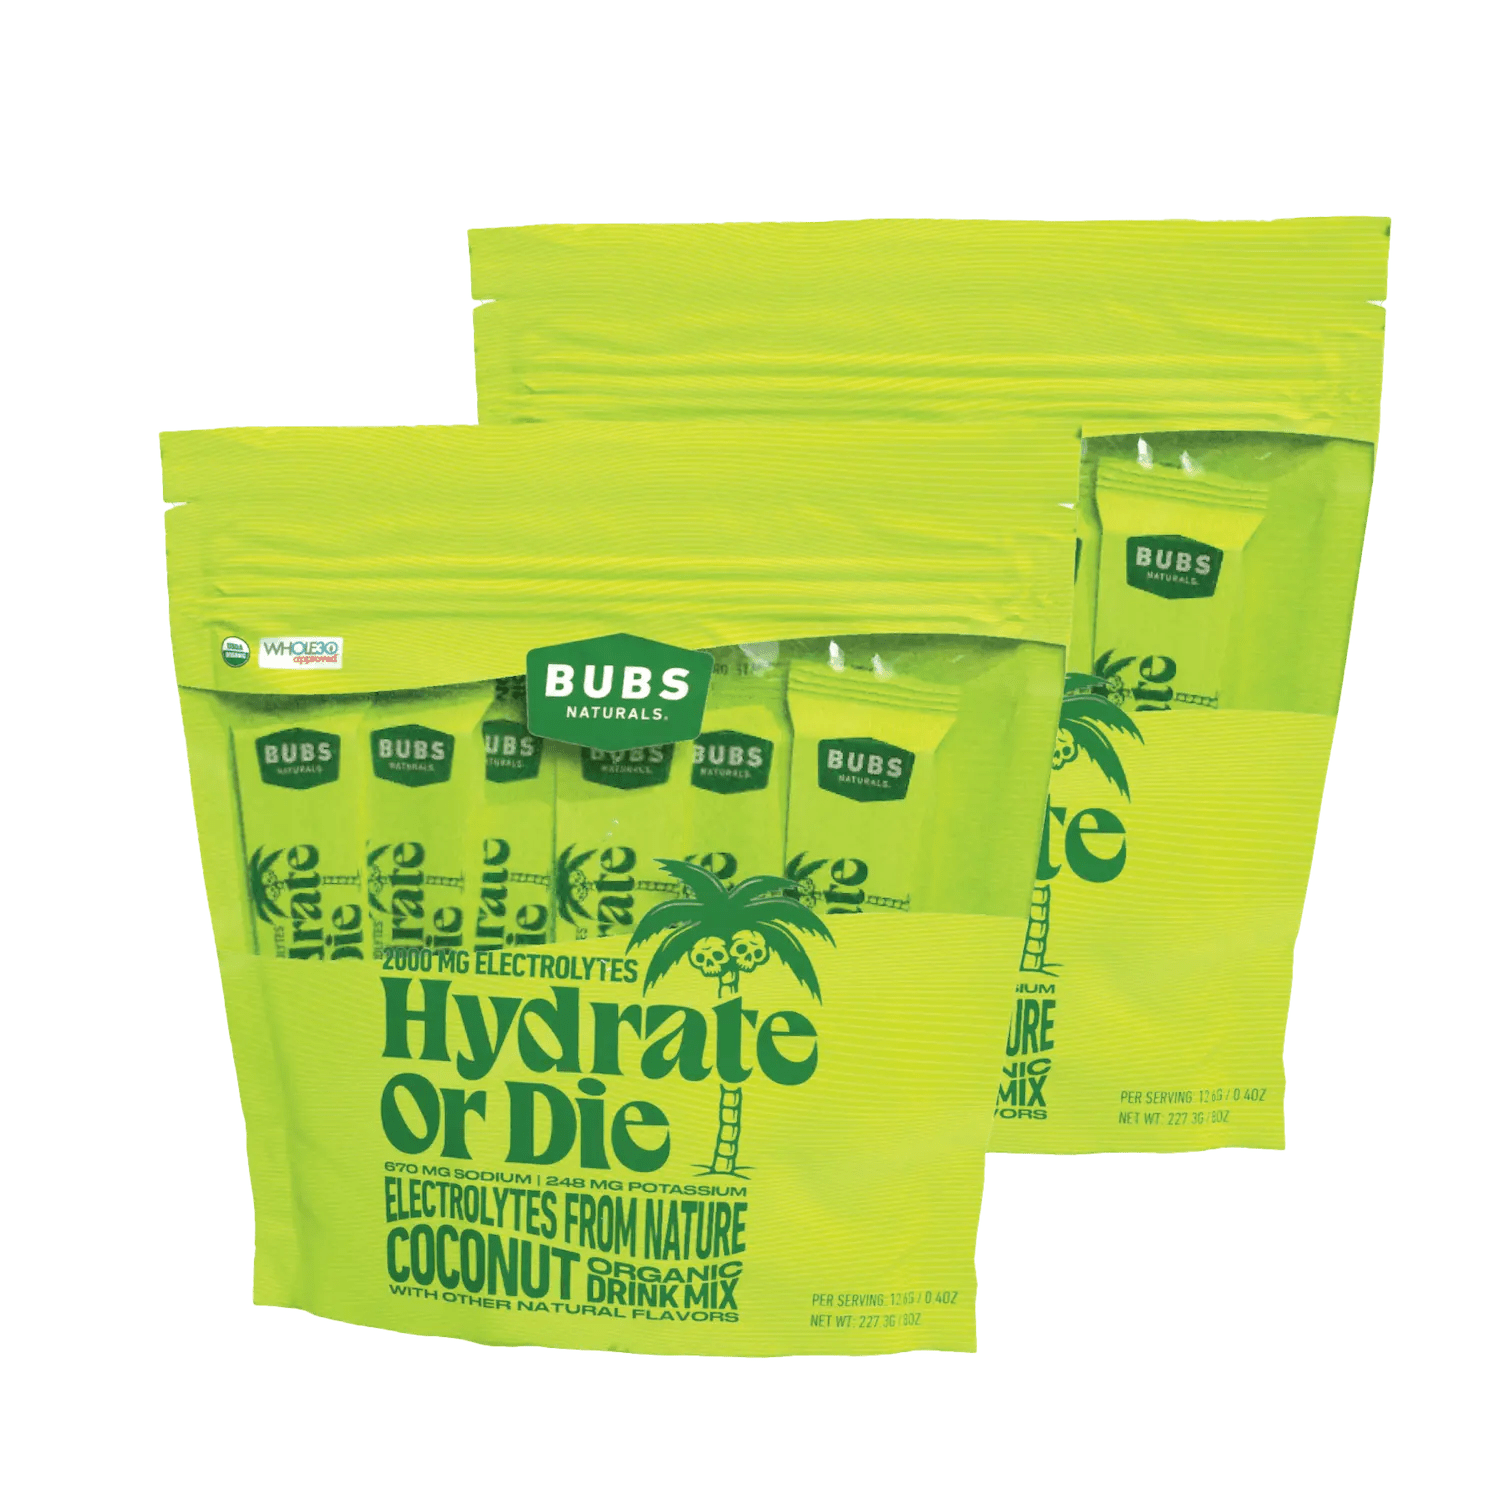 BUBS Naturals Hydrate or Die, 18 count bag, Natural Electrolytes, coconut, bundle of 2